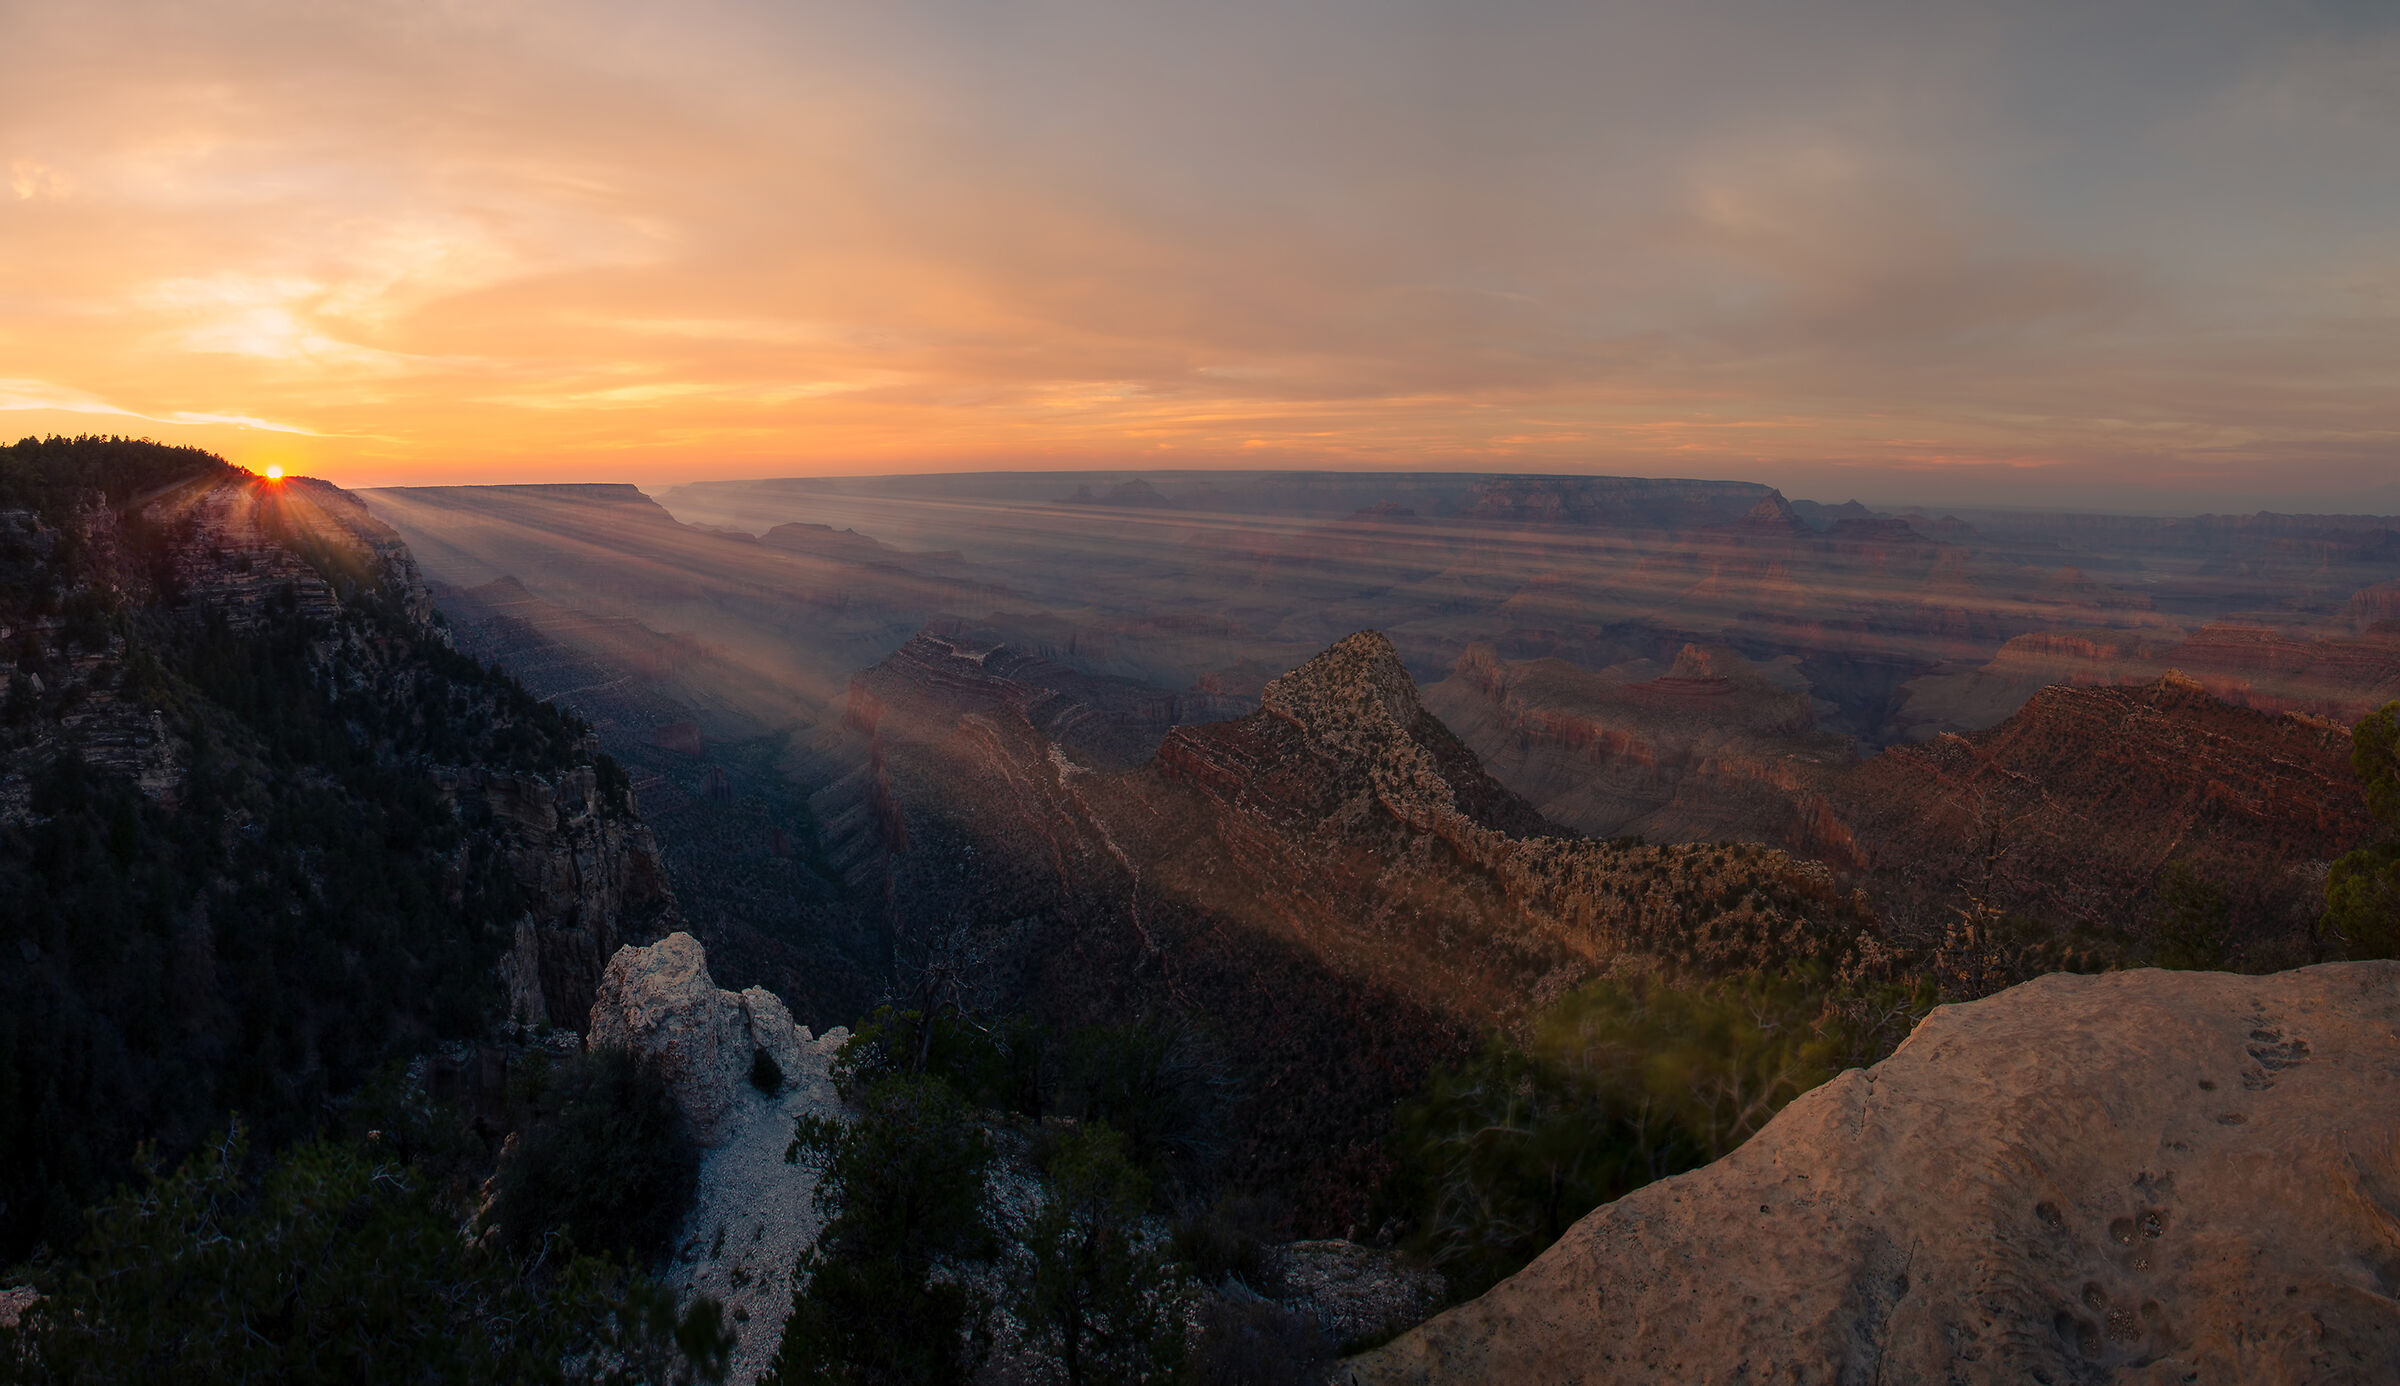 Sunrise over the Grand Canyon...